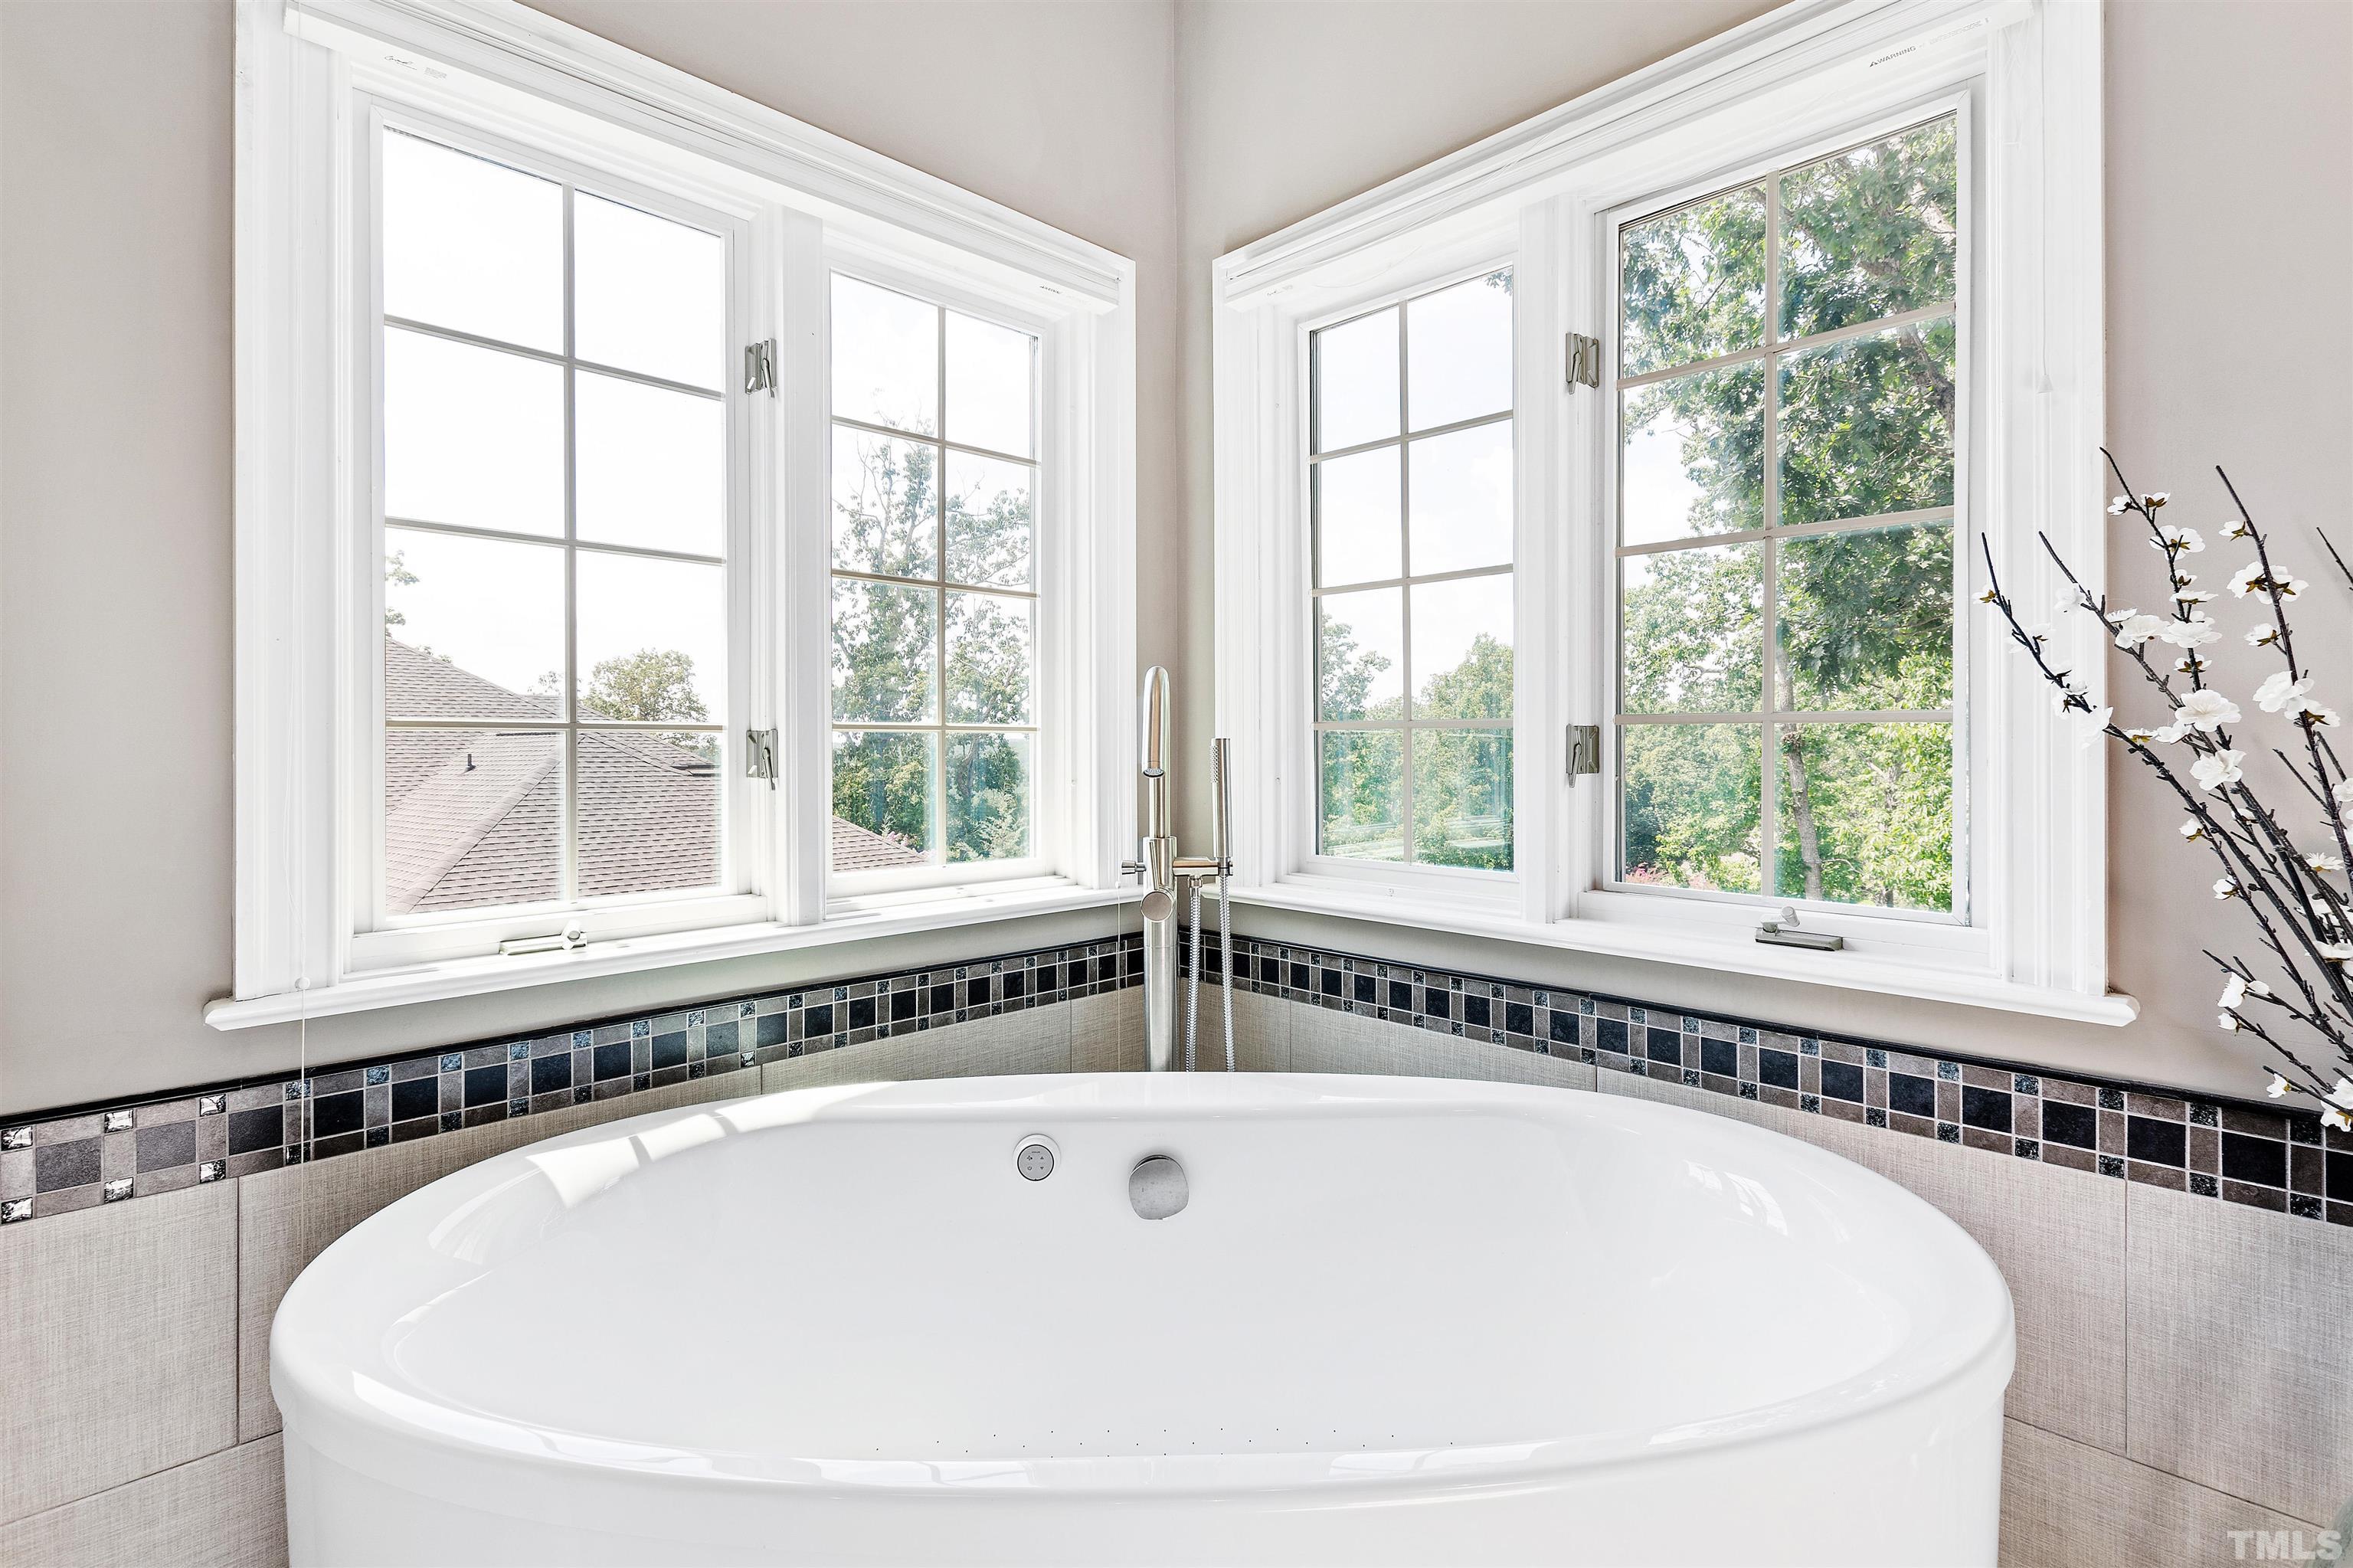 Stand-alone tub is another feature of this updated bathroom, along with 12